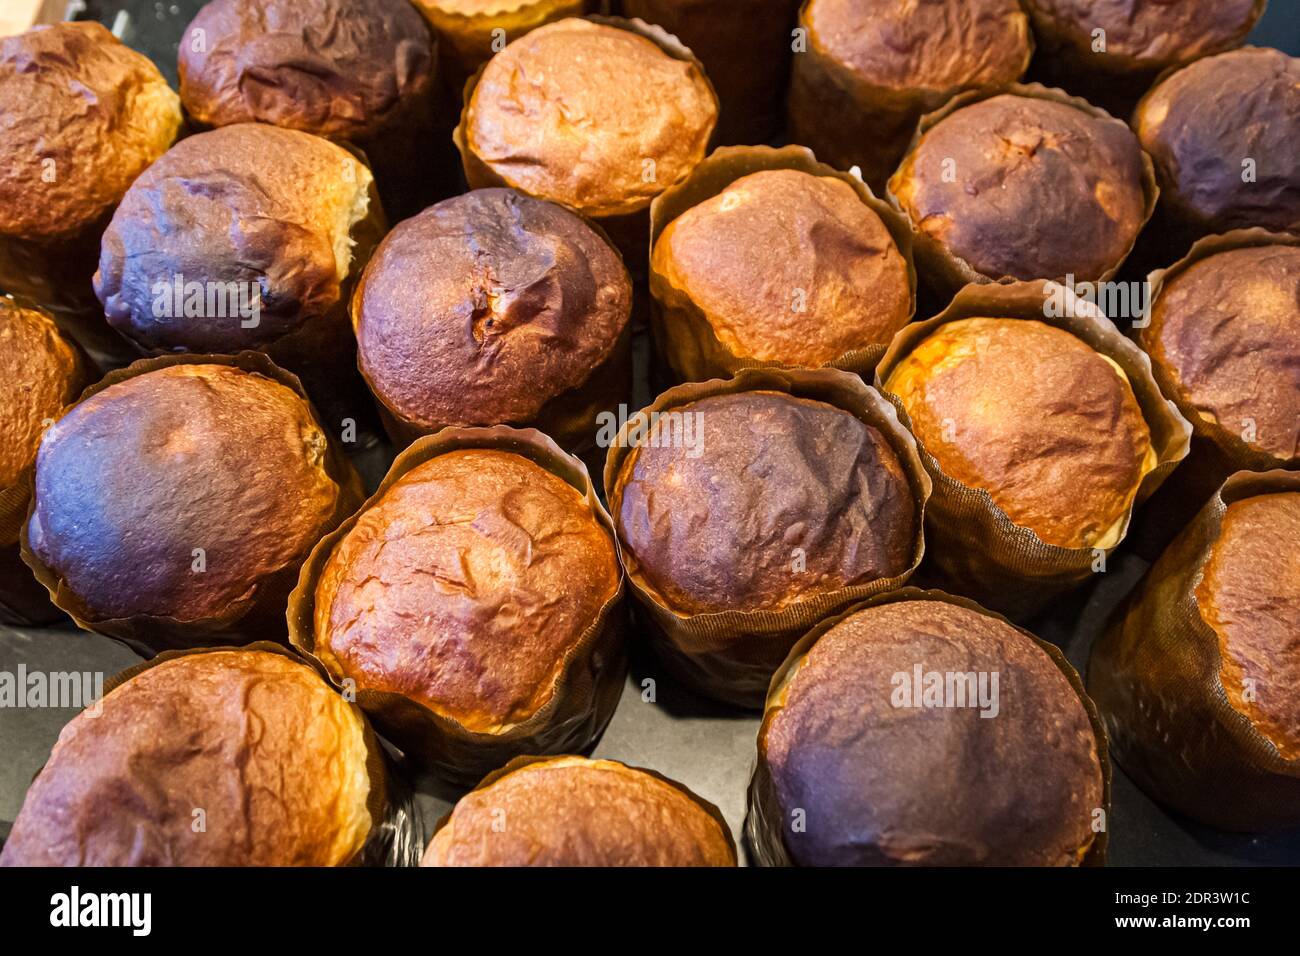 Panettone at Bread Baking Workshop with Lutz Geisler and Manfred Schellin in Berlin, Germany Stock Photo